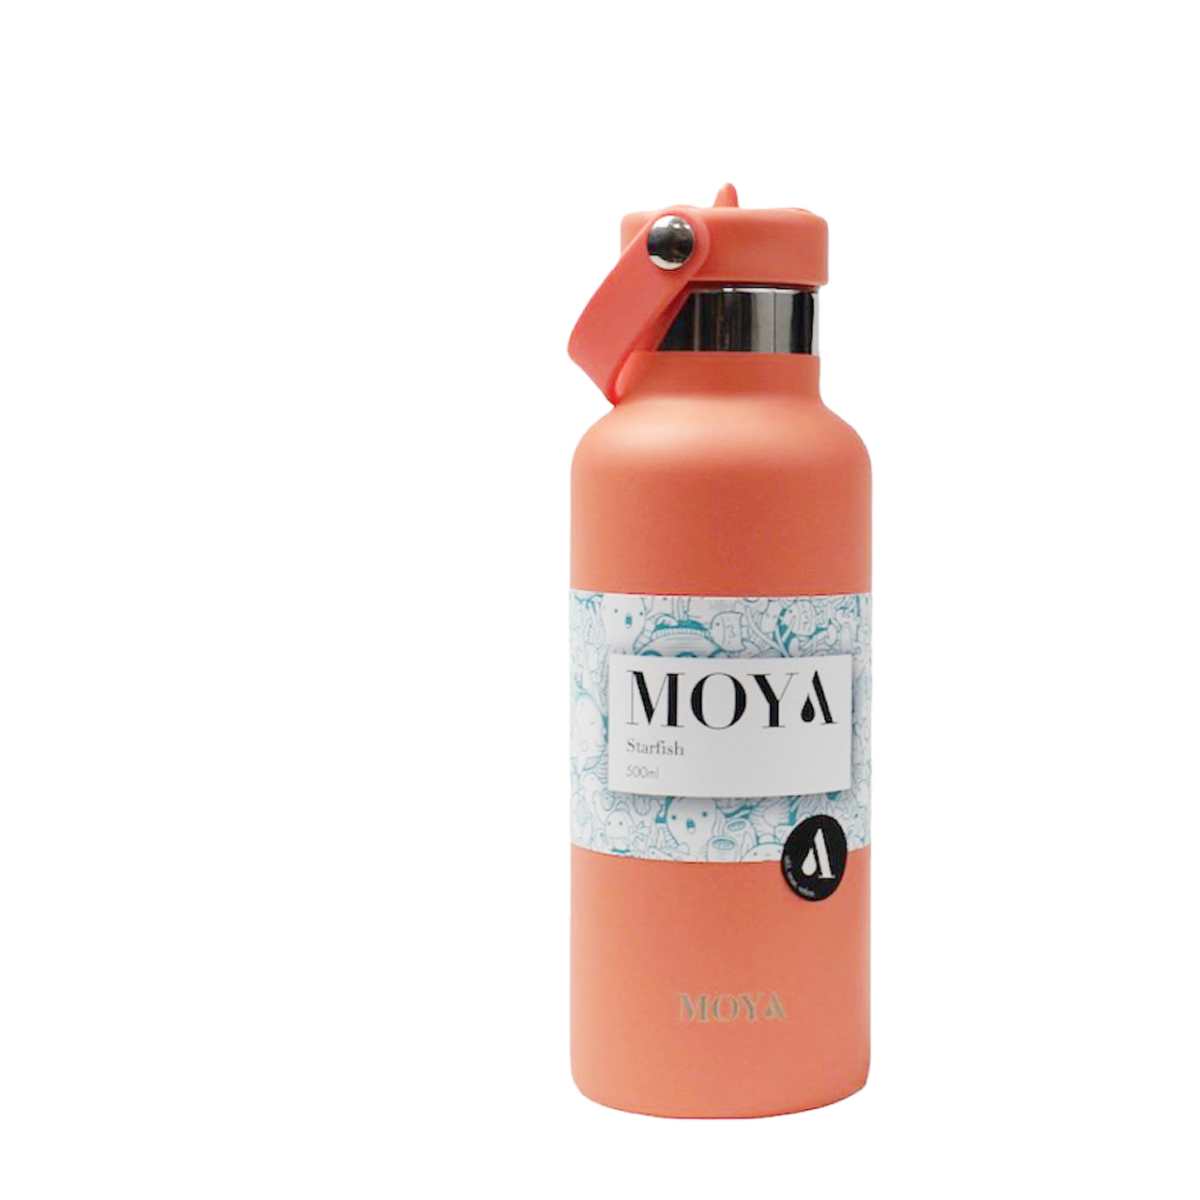 Moya “Starfish” 500ml Insulated Sustainable Water Bottle Coral